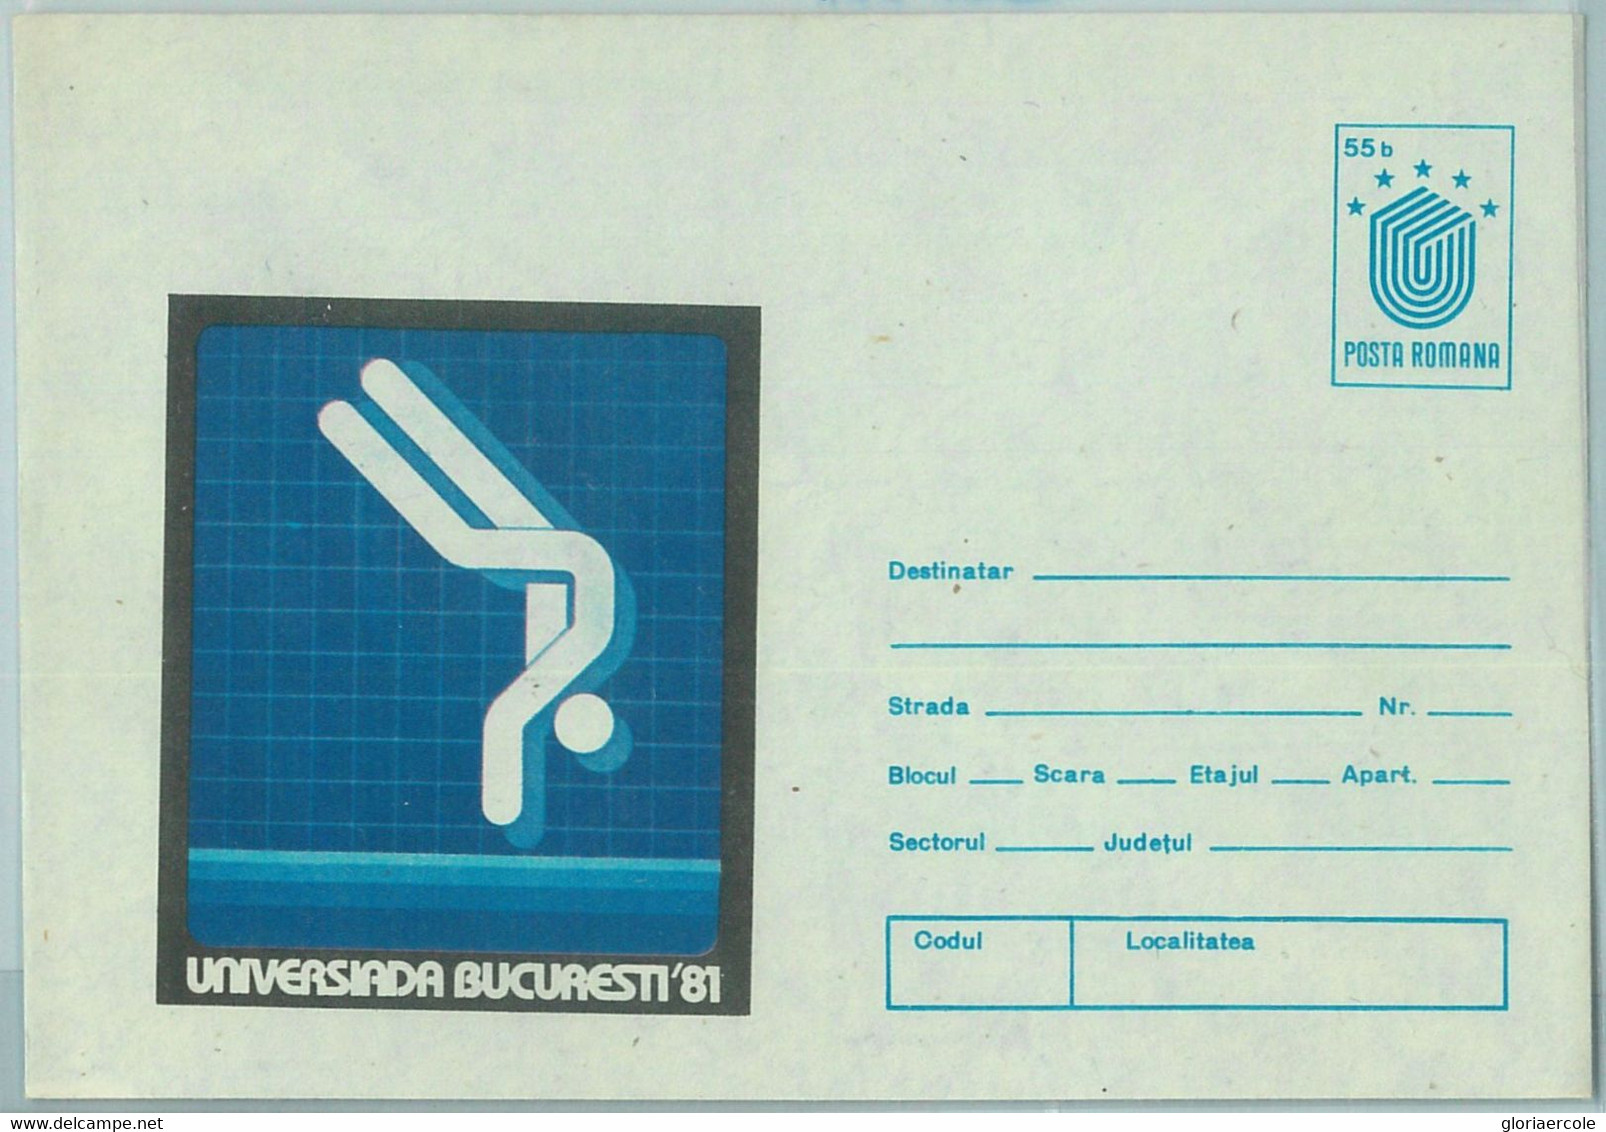 67803 - ROMANIA  - POSTAL HISTORY - STATIONERY COVER - 1981, Universiade Games Bucarest '81, Diving - Immersione